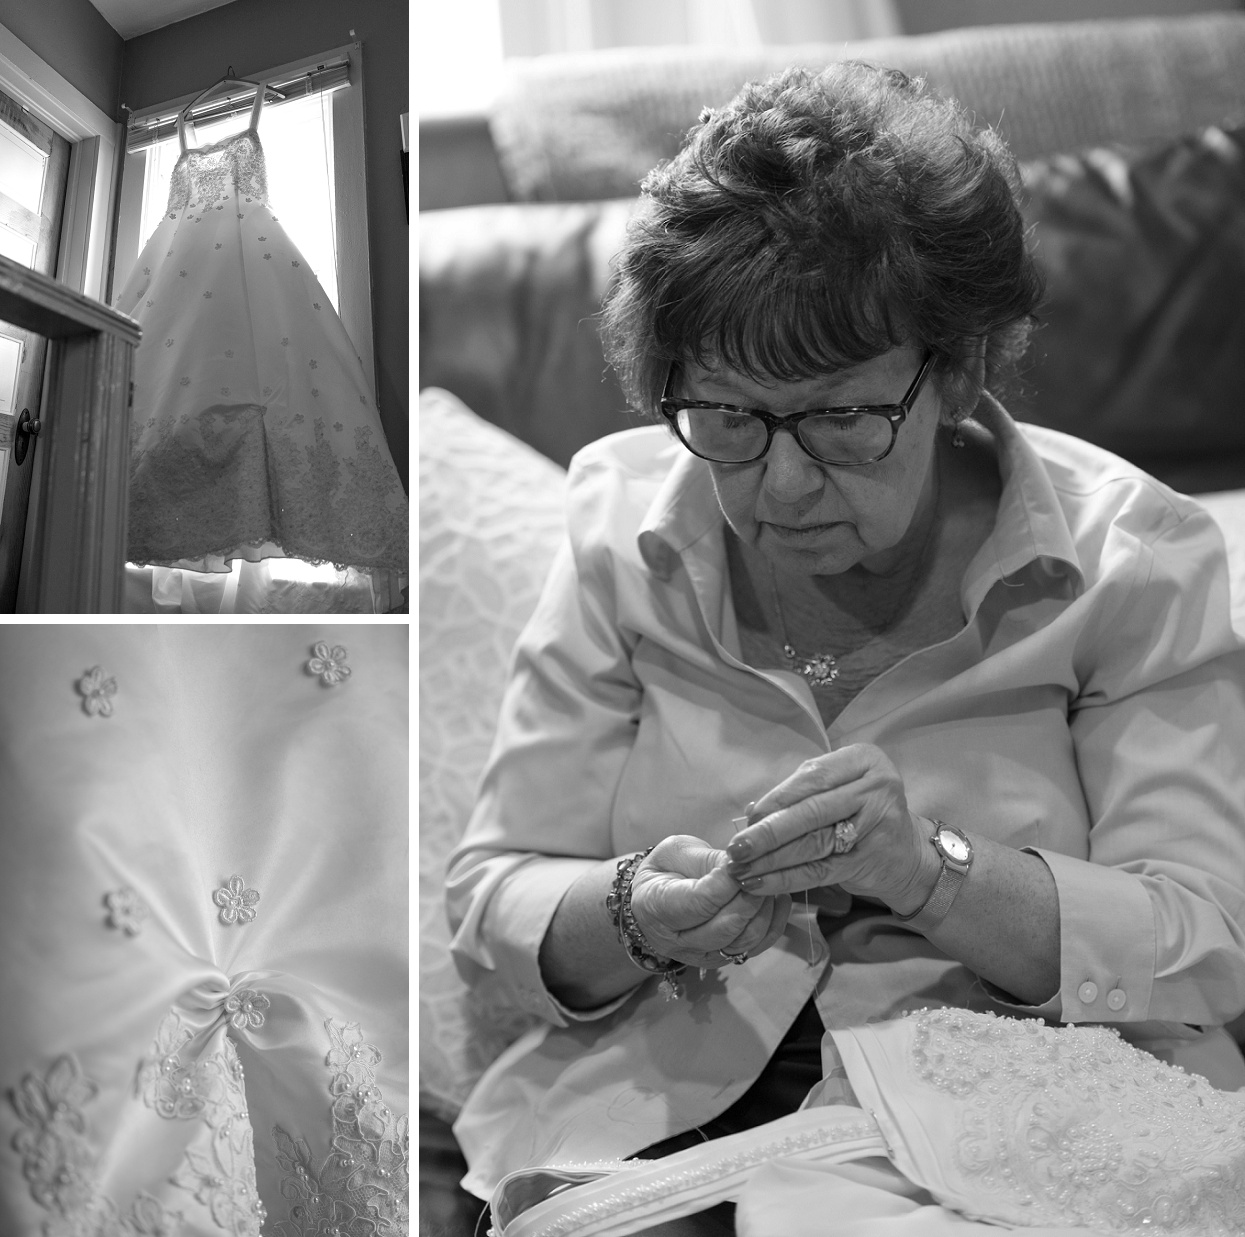 Sewing bride's dress, last minute alterations, mom threading a needle, black and white shot of wedding dress hanging in window